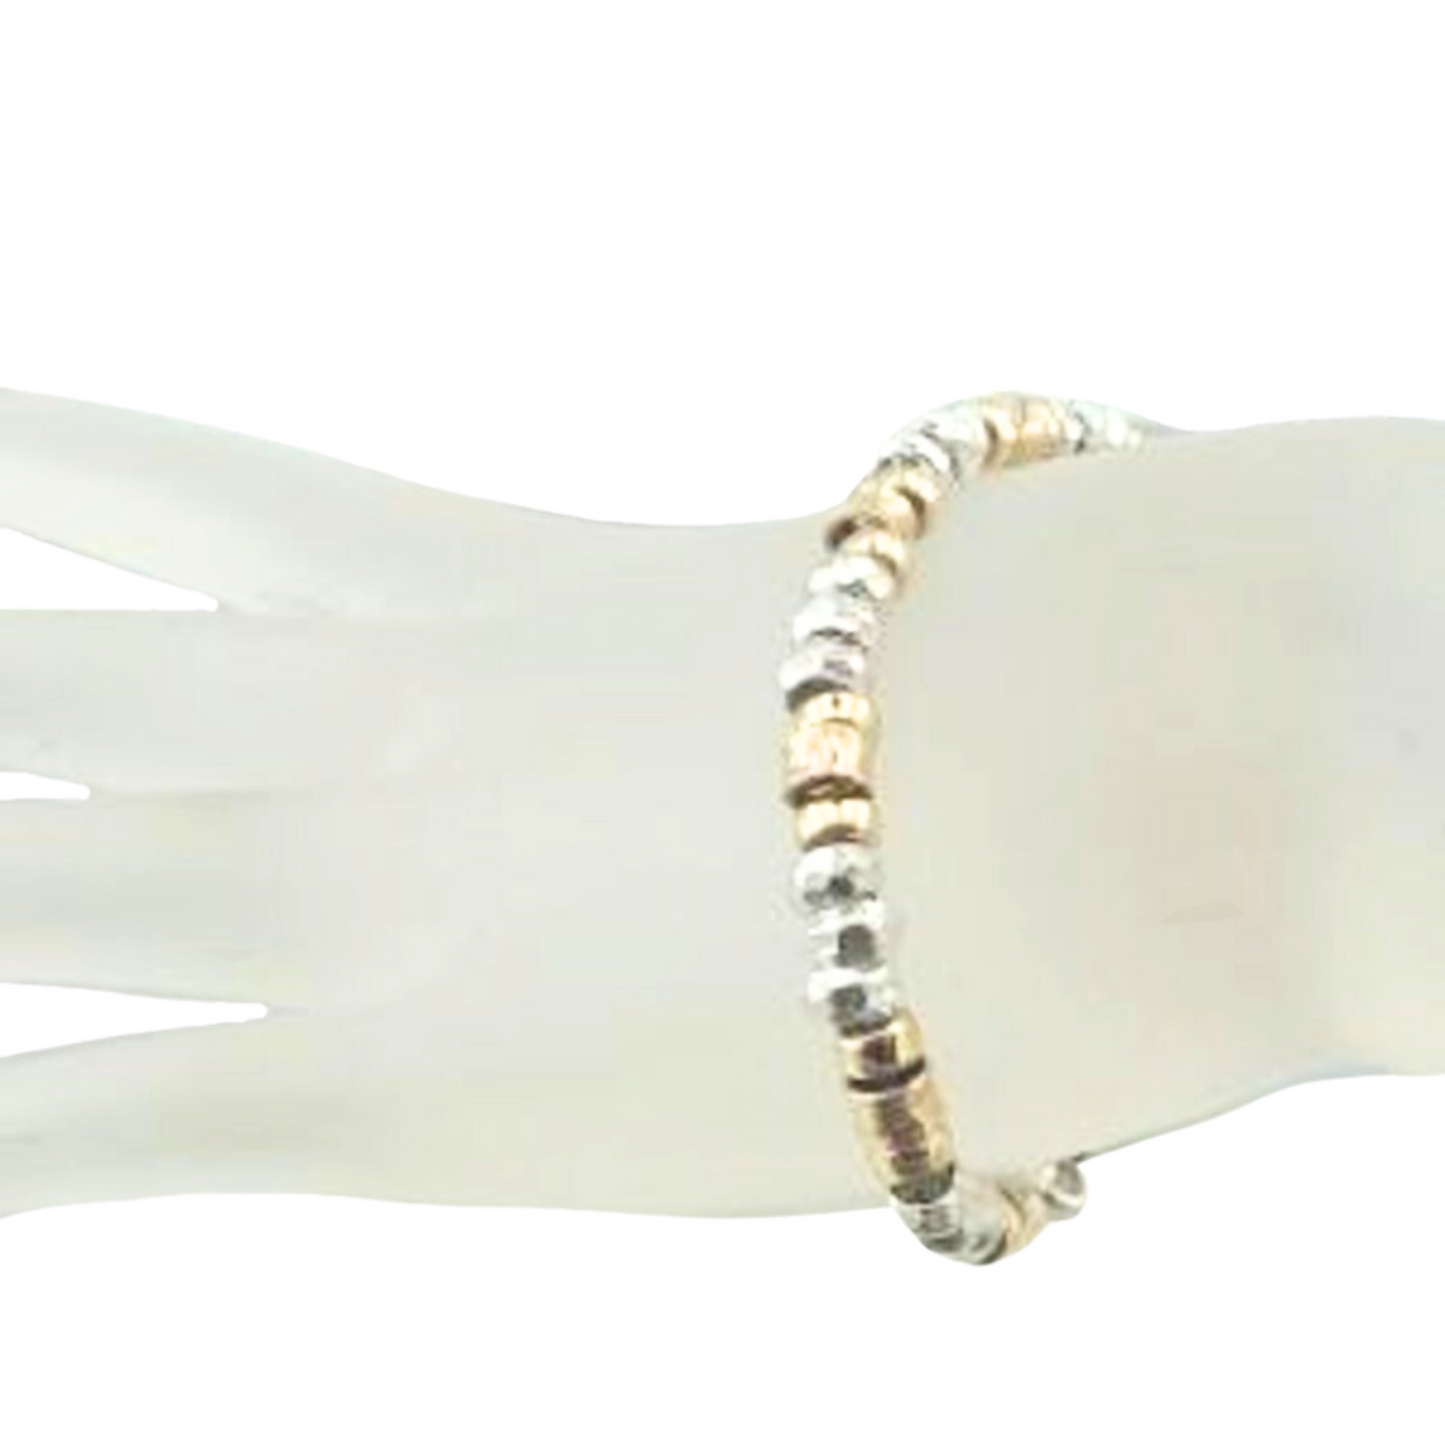 The Bracelet is made of solid Sterling silver and a Yellow gold-filled, 14K. Highlighting the sparkling Solid metal beads.